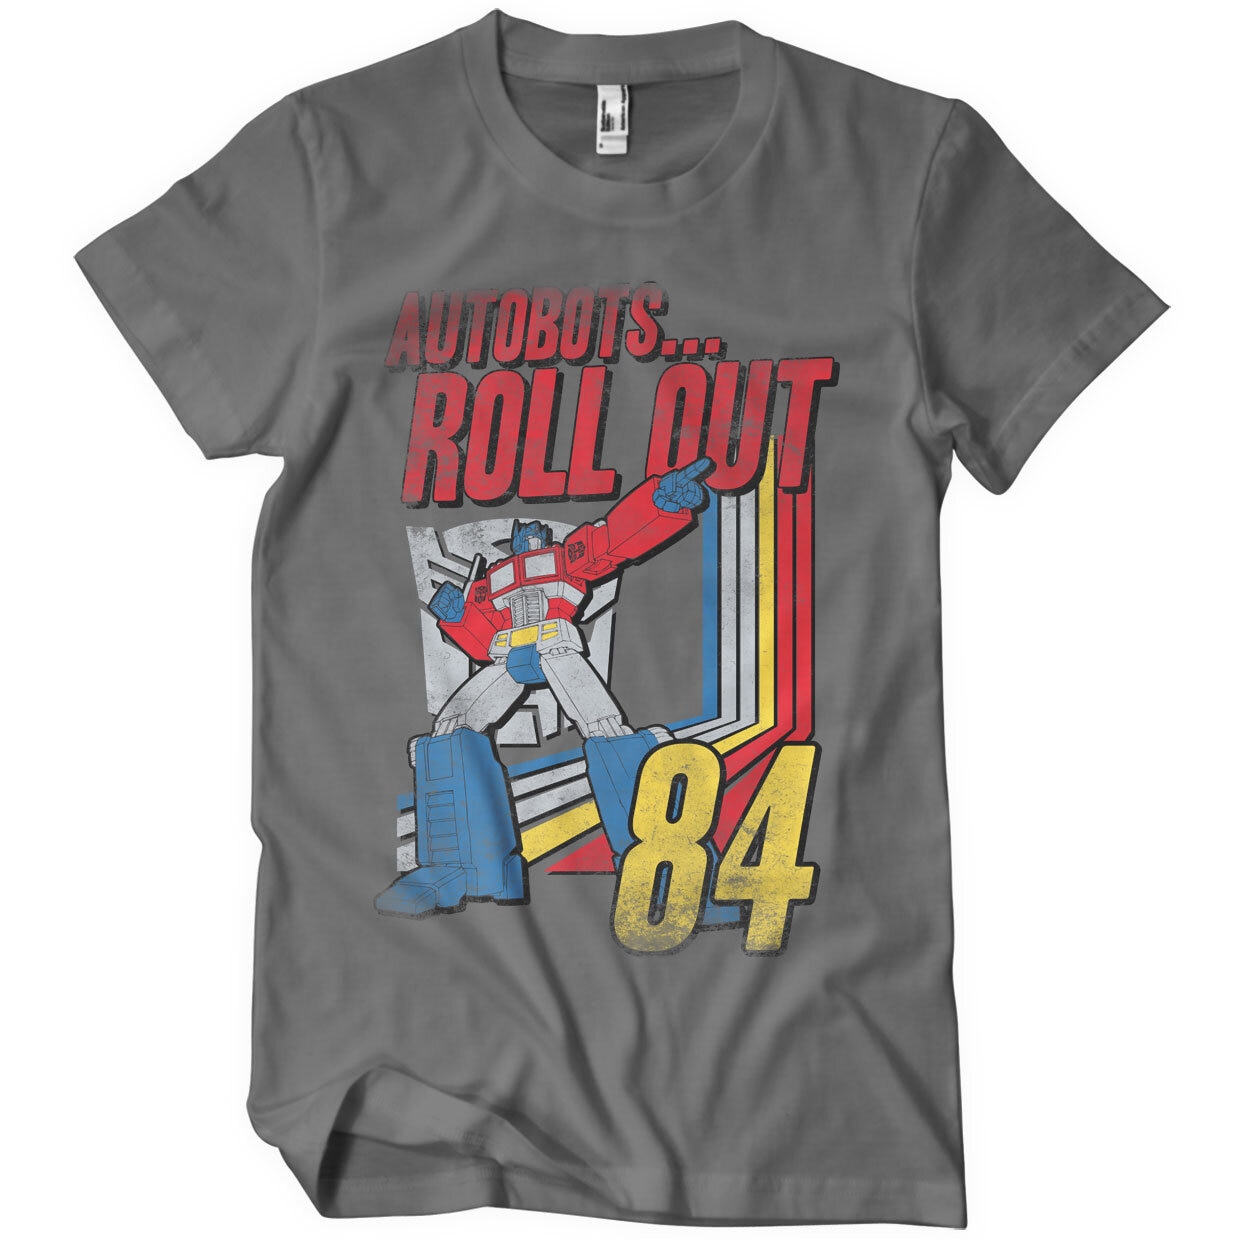 Autobots - Roll Out T-Shirt